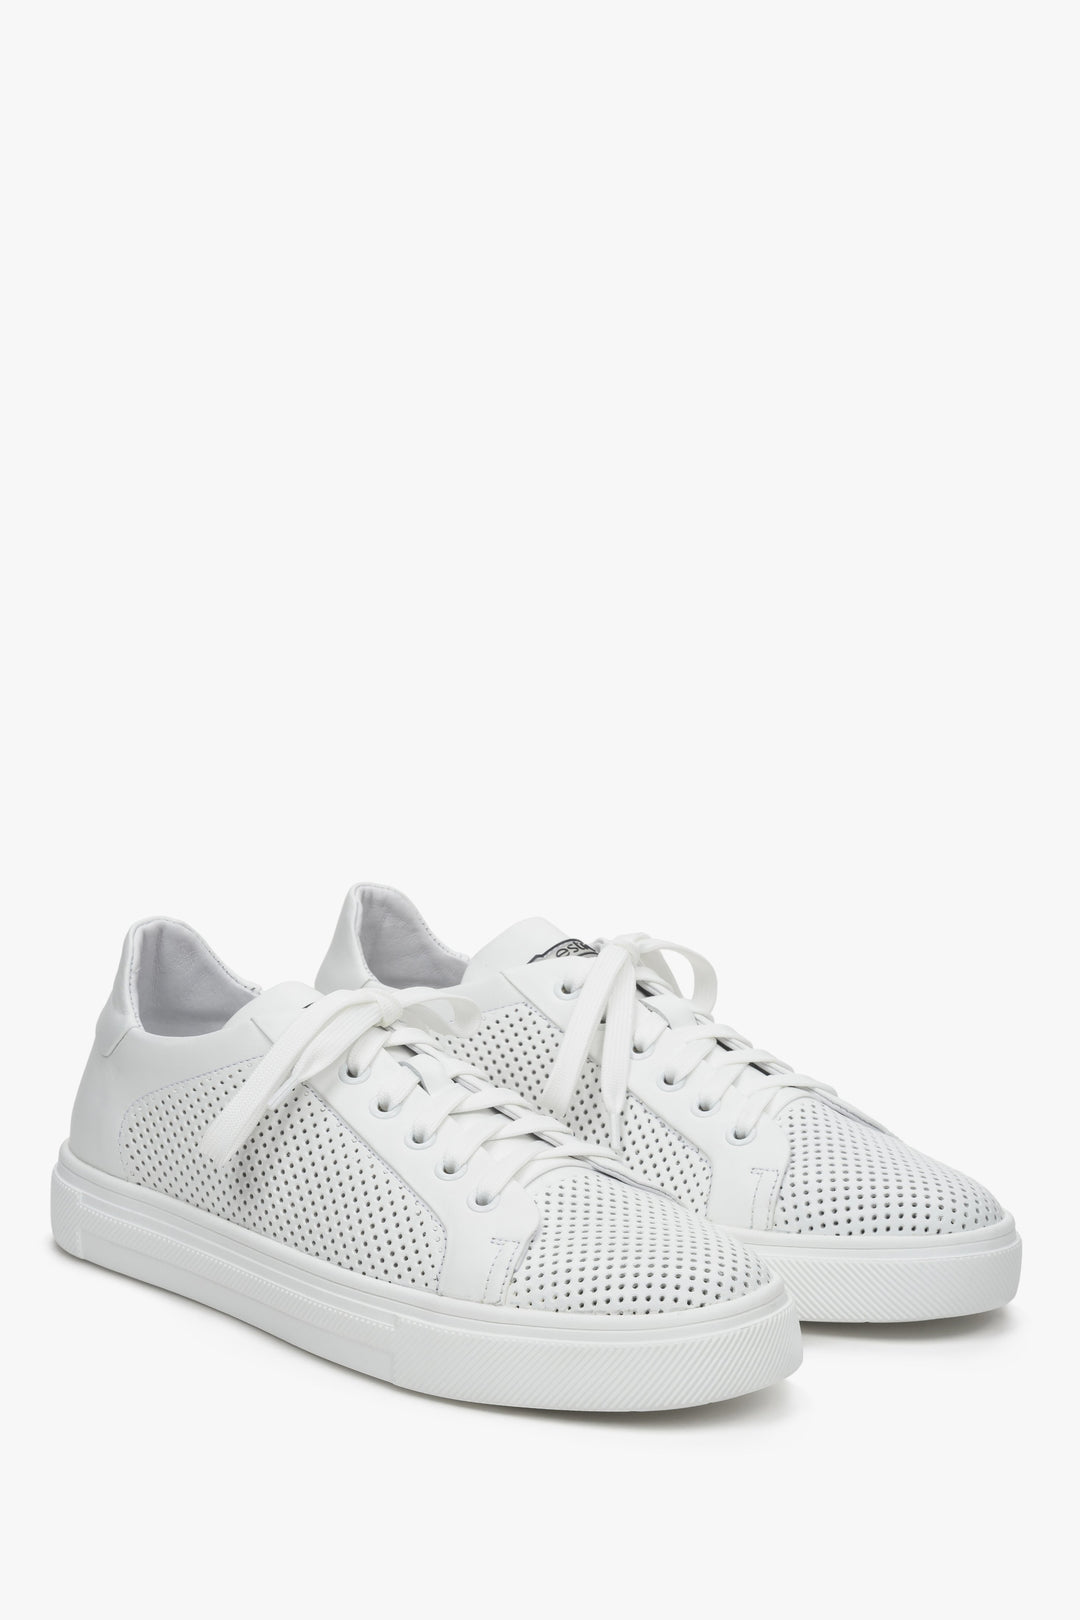 Men's White sneakers with perforation and laces - Estro brand model for summer.